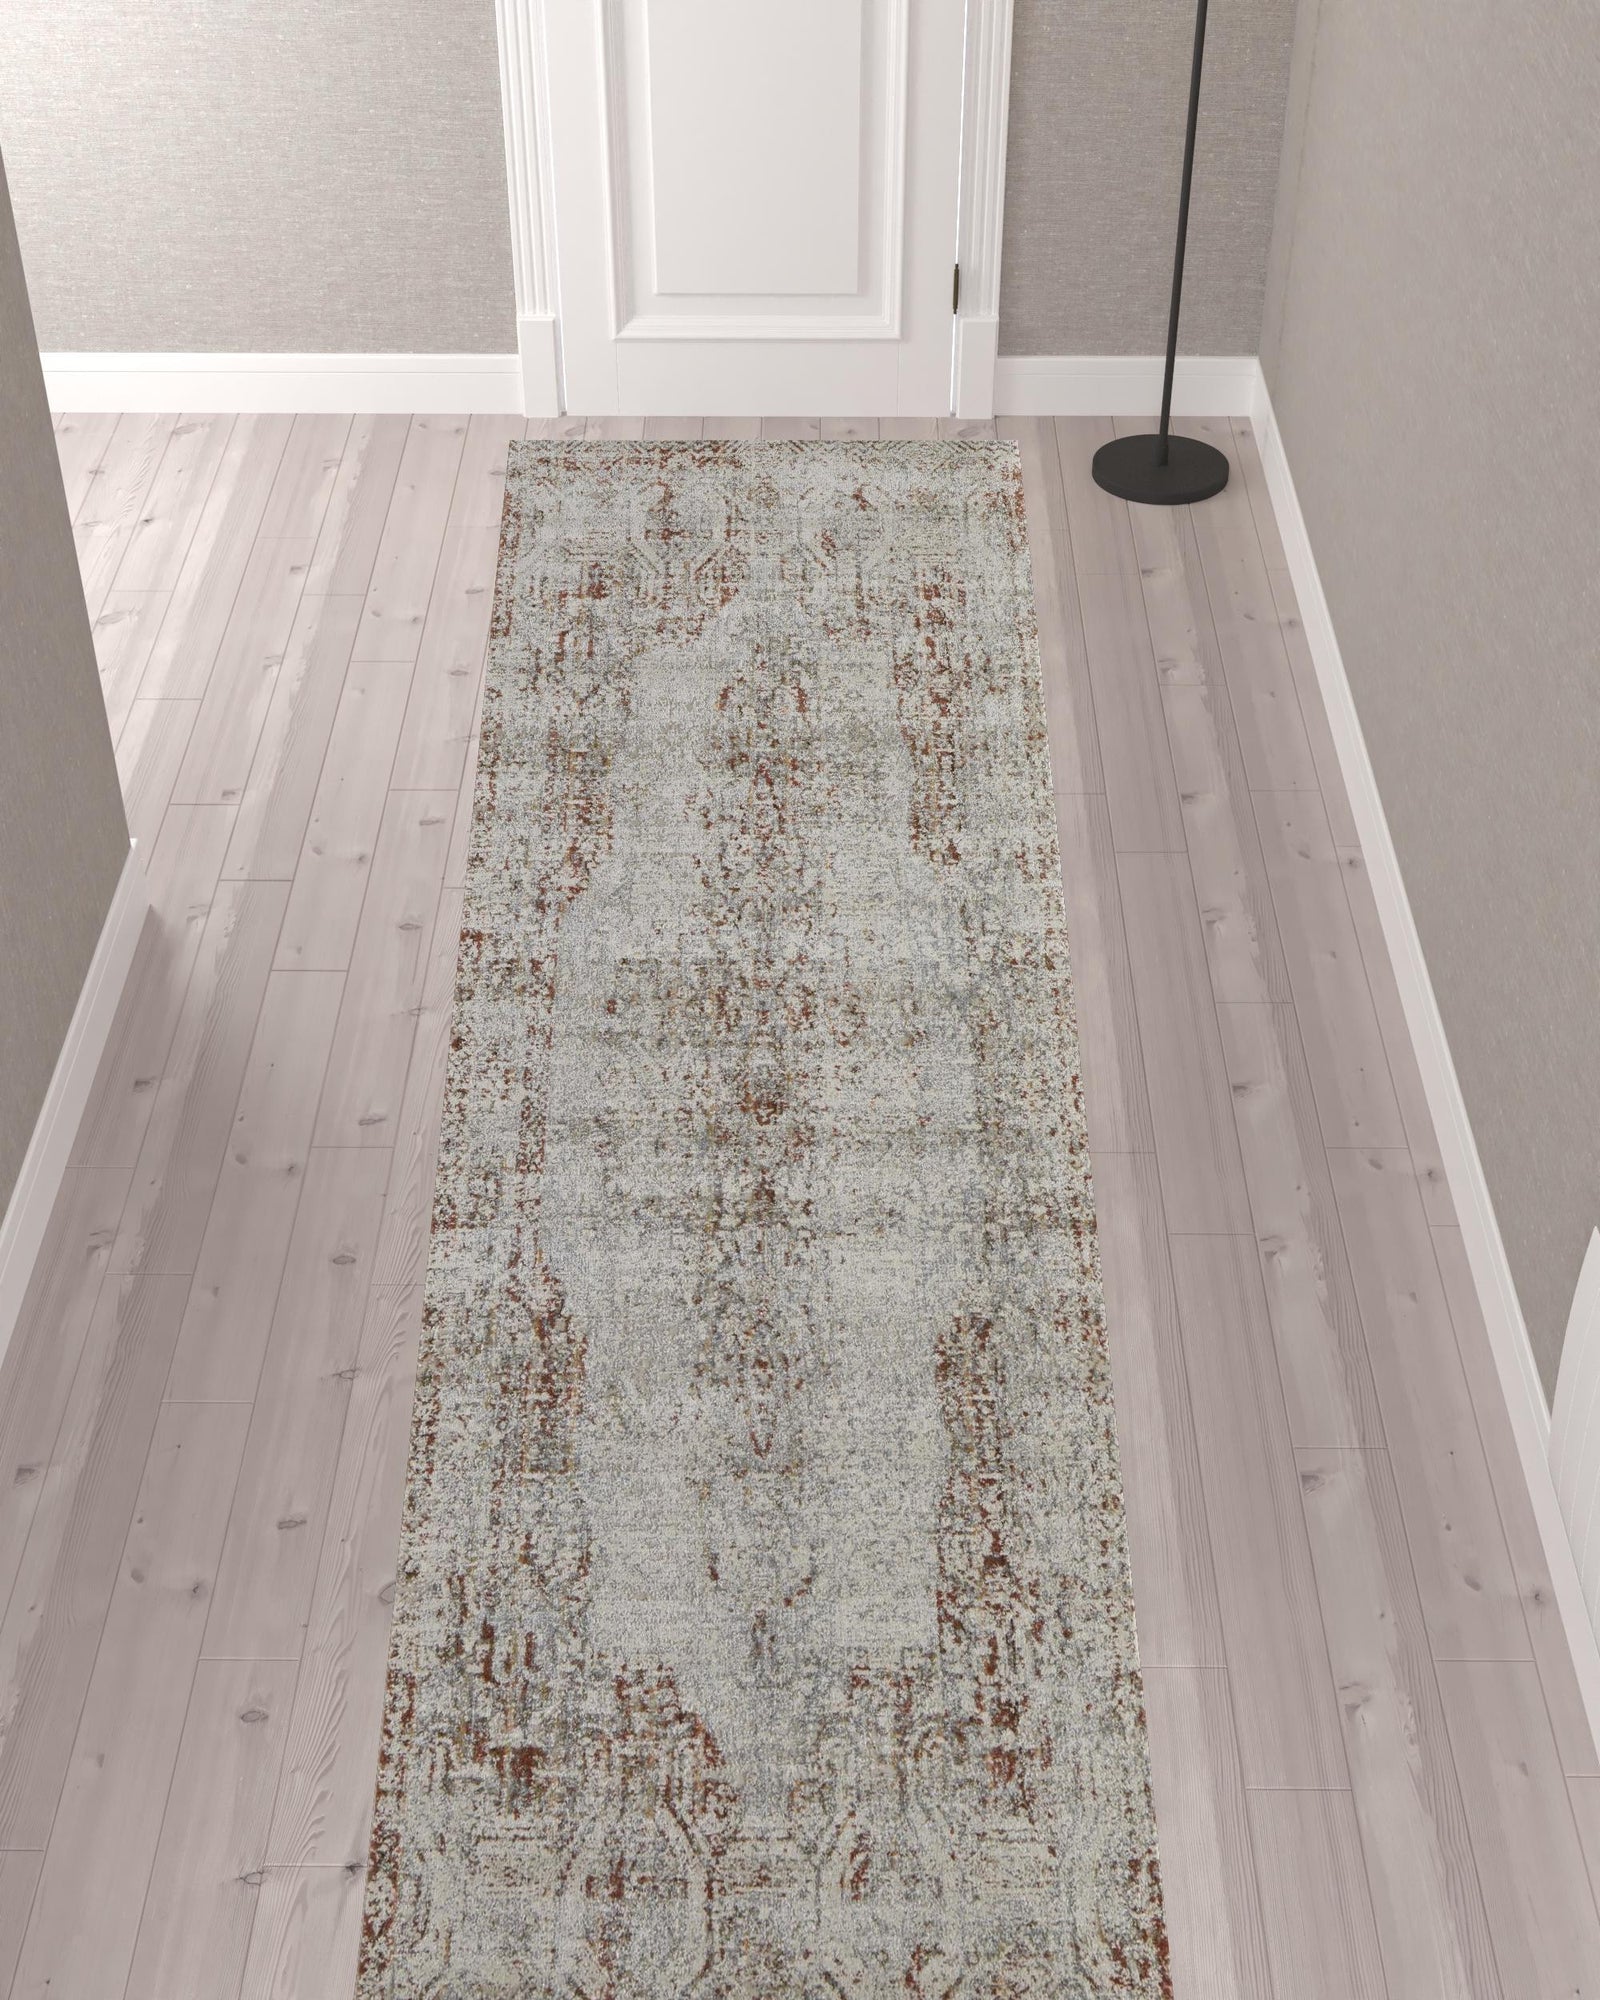 5' X 8' Tan Ivory And Orange Floral Power Loom Distressed Area Rug With Fringe